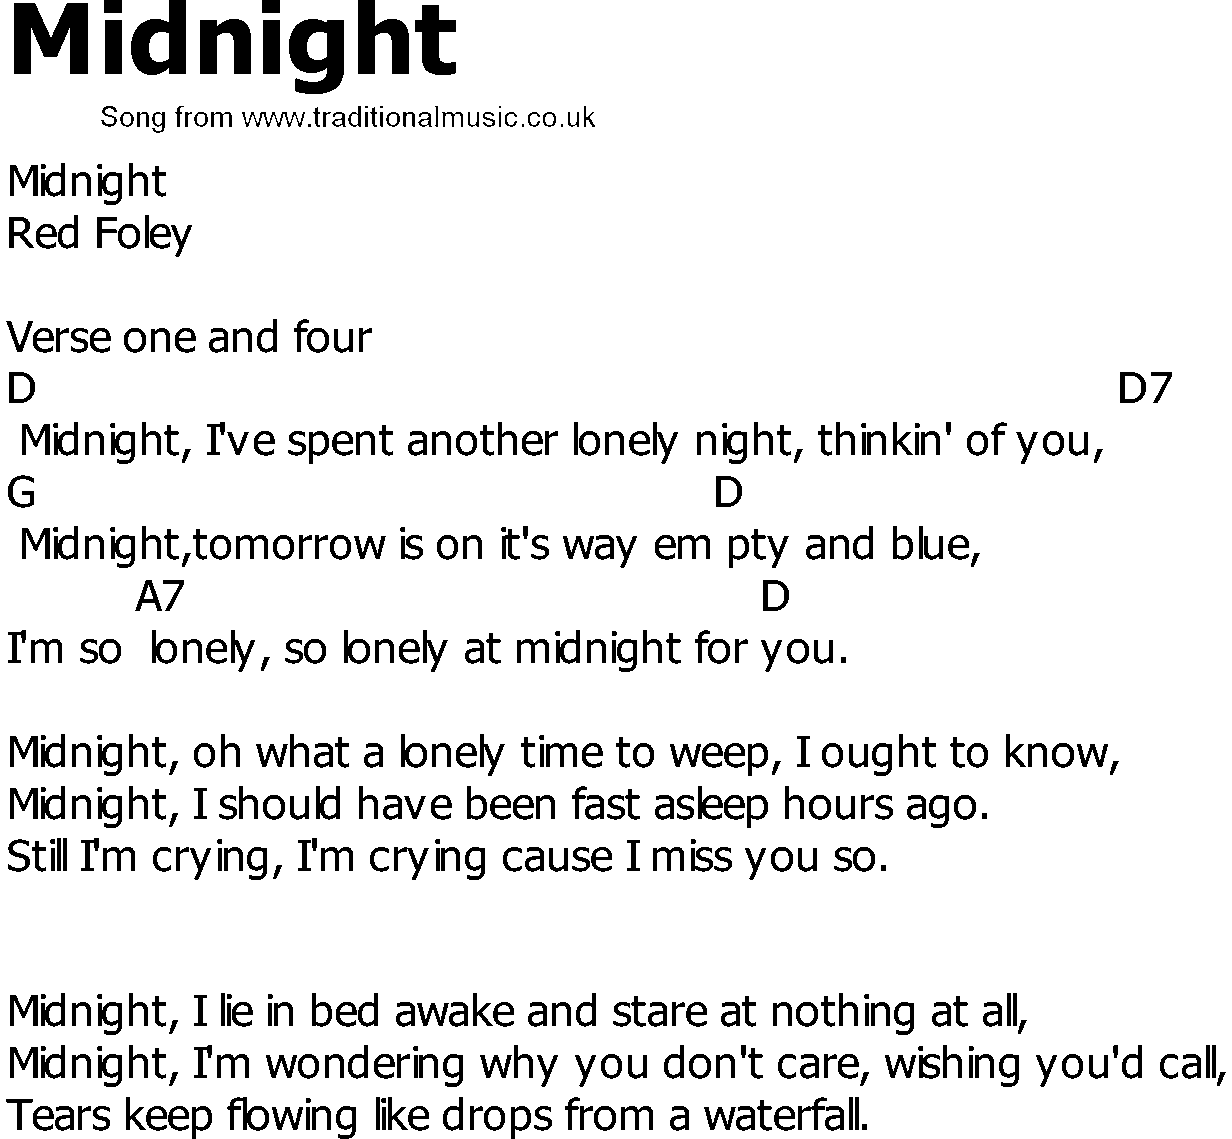 Old Country song lyrics with chords - Midnight